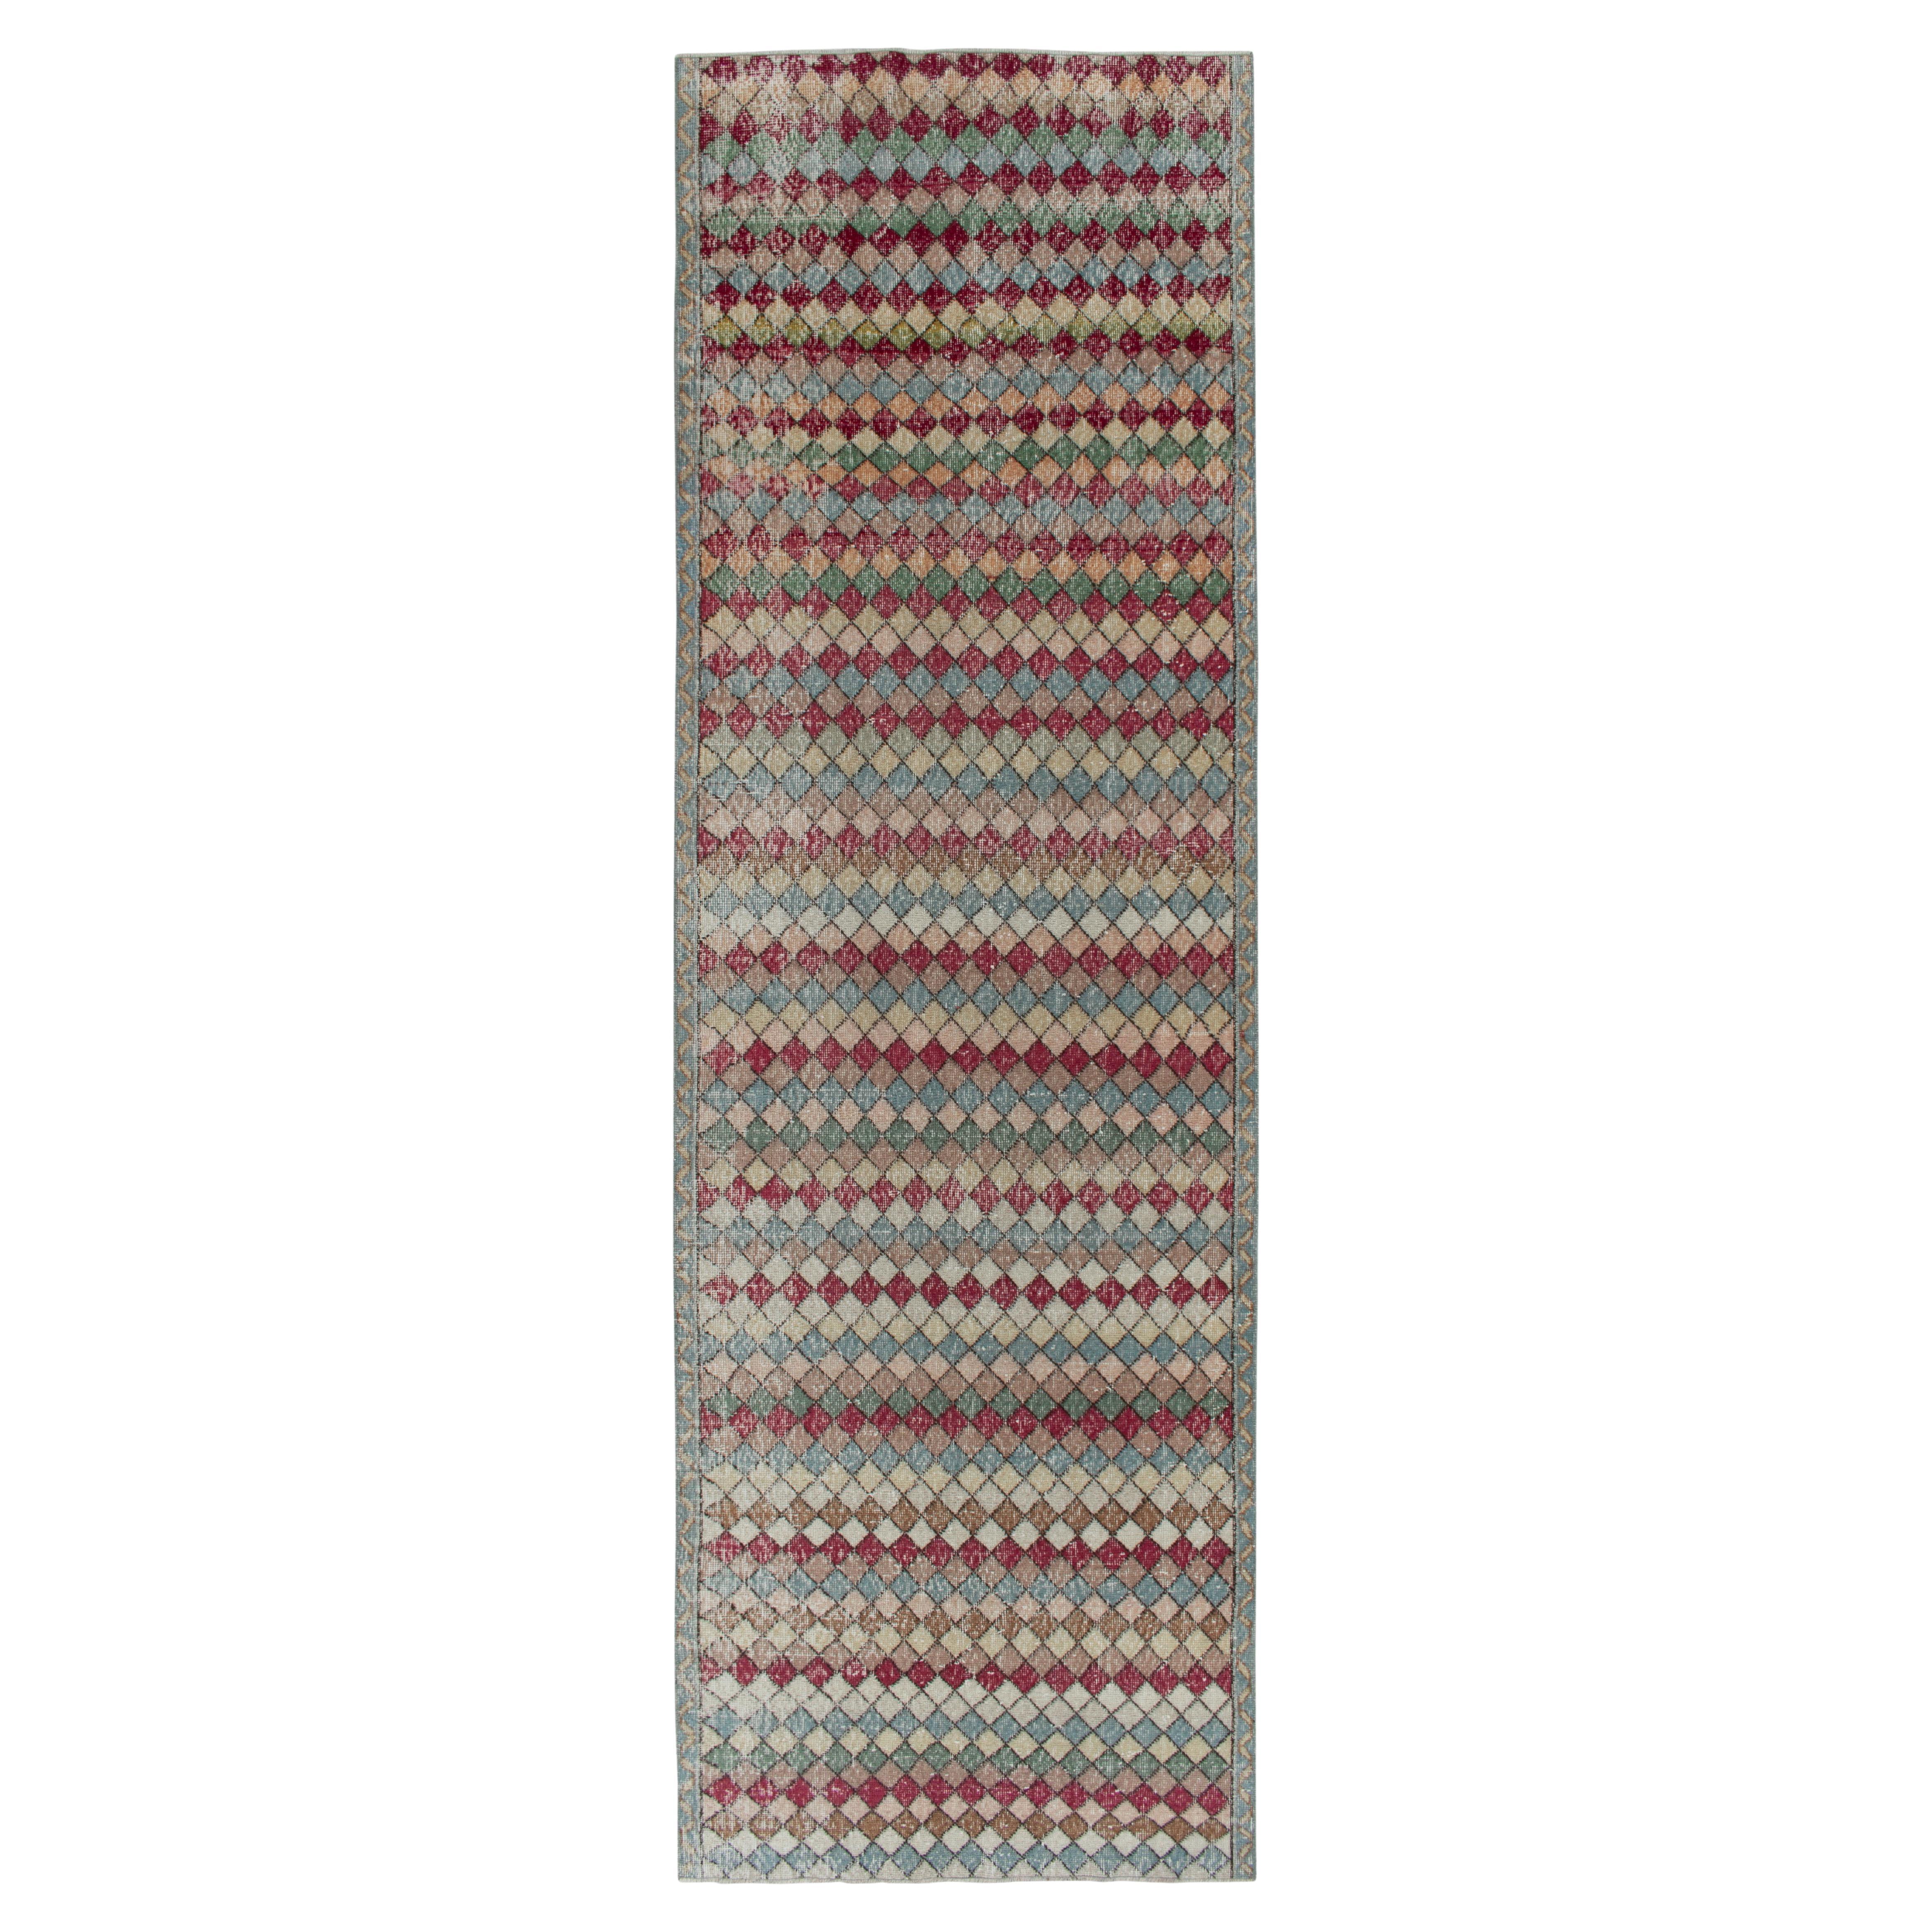 1960s Vintage Distressed Deco Rug in Multicolor Geometric Pattern by Rug & Kilim For Sale